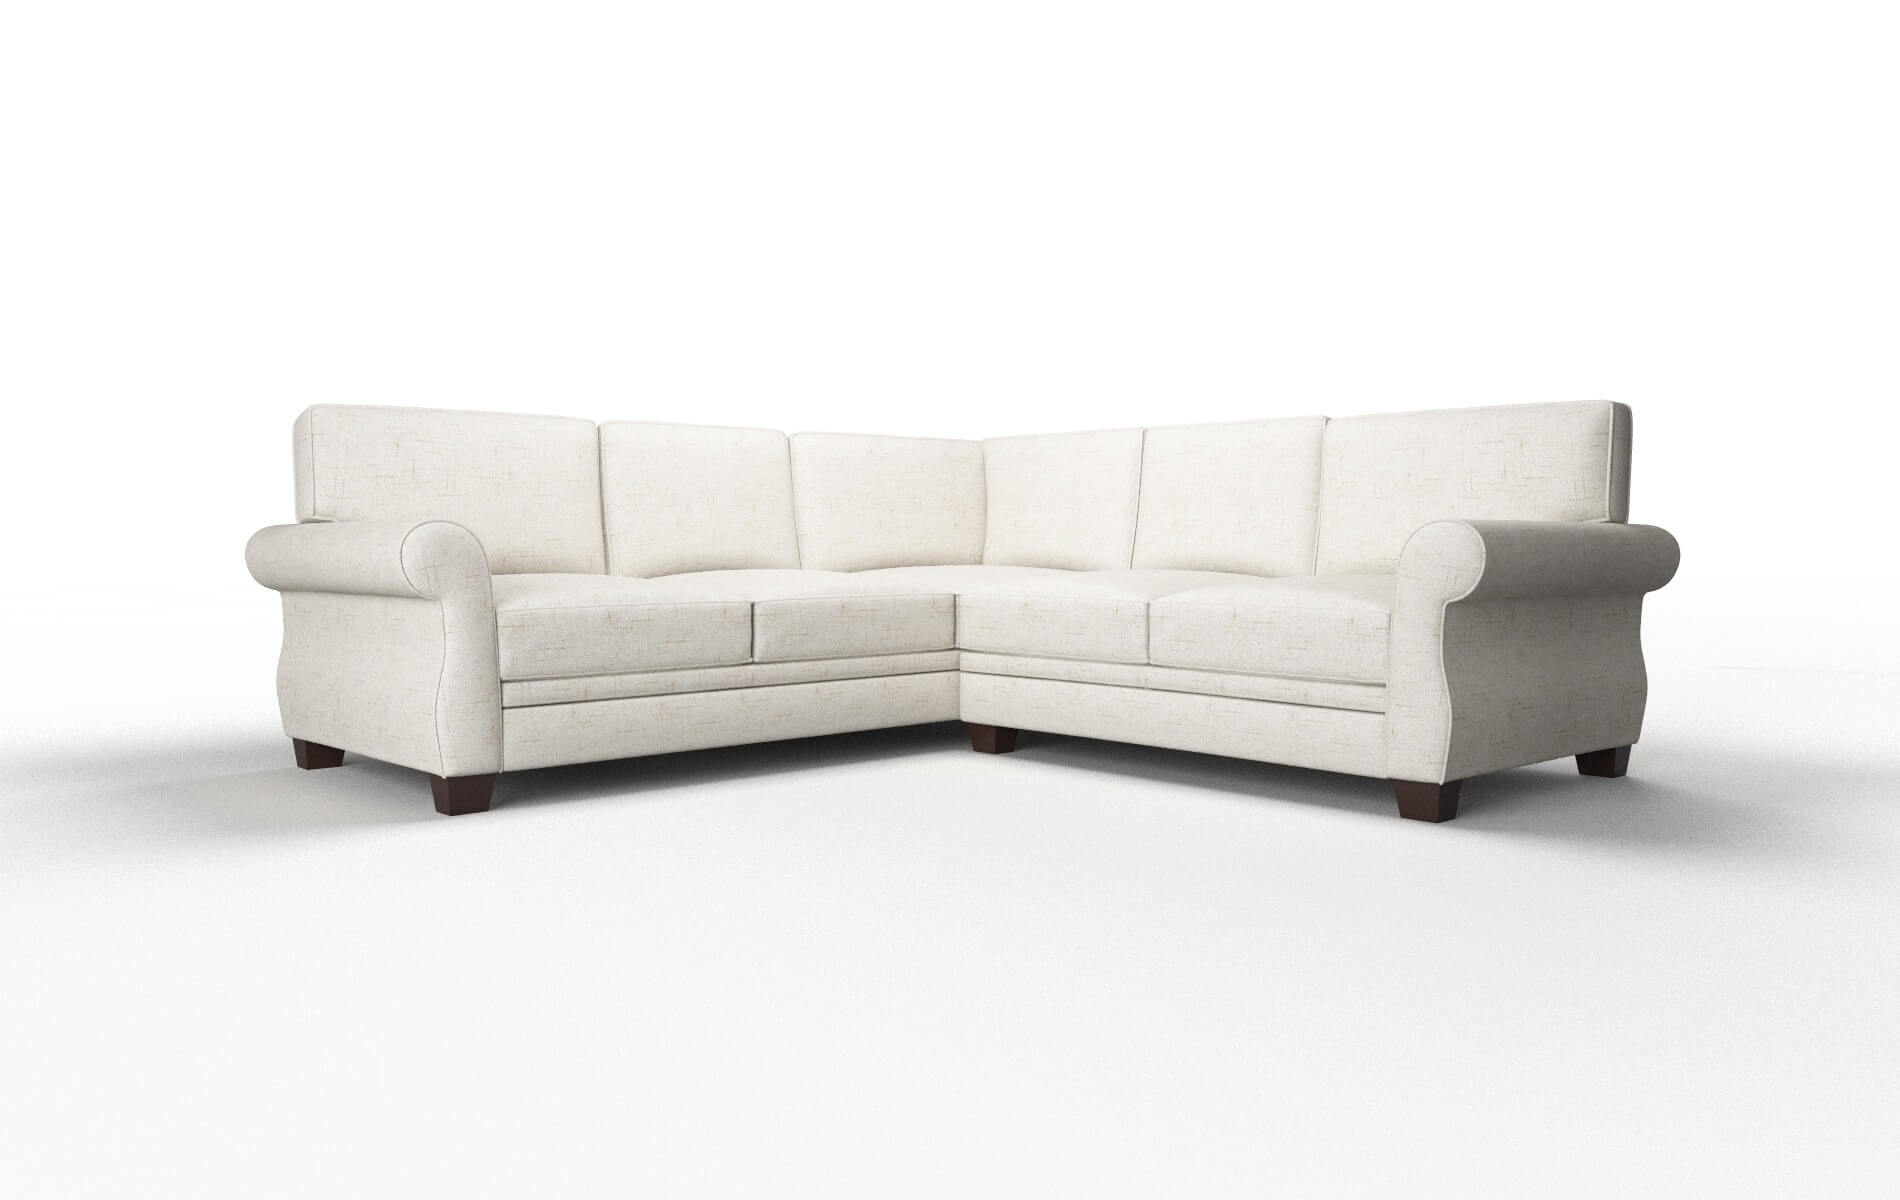 Rome Oceanside Natural Sectional espresso legs